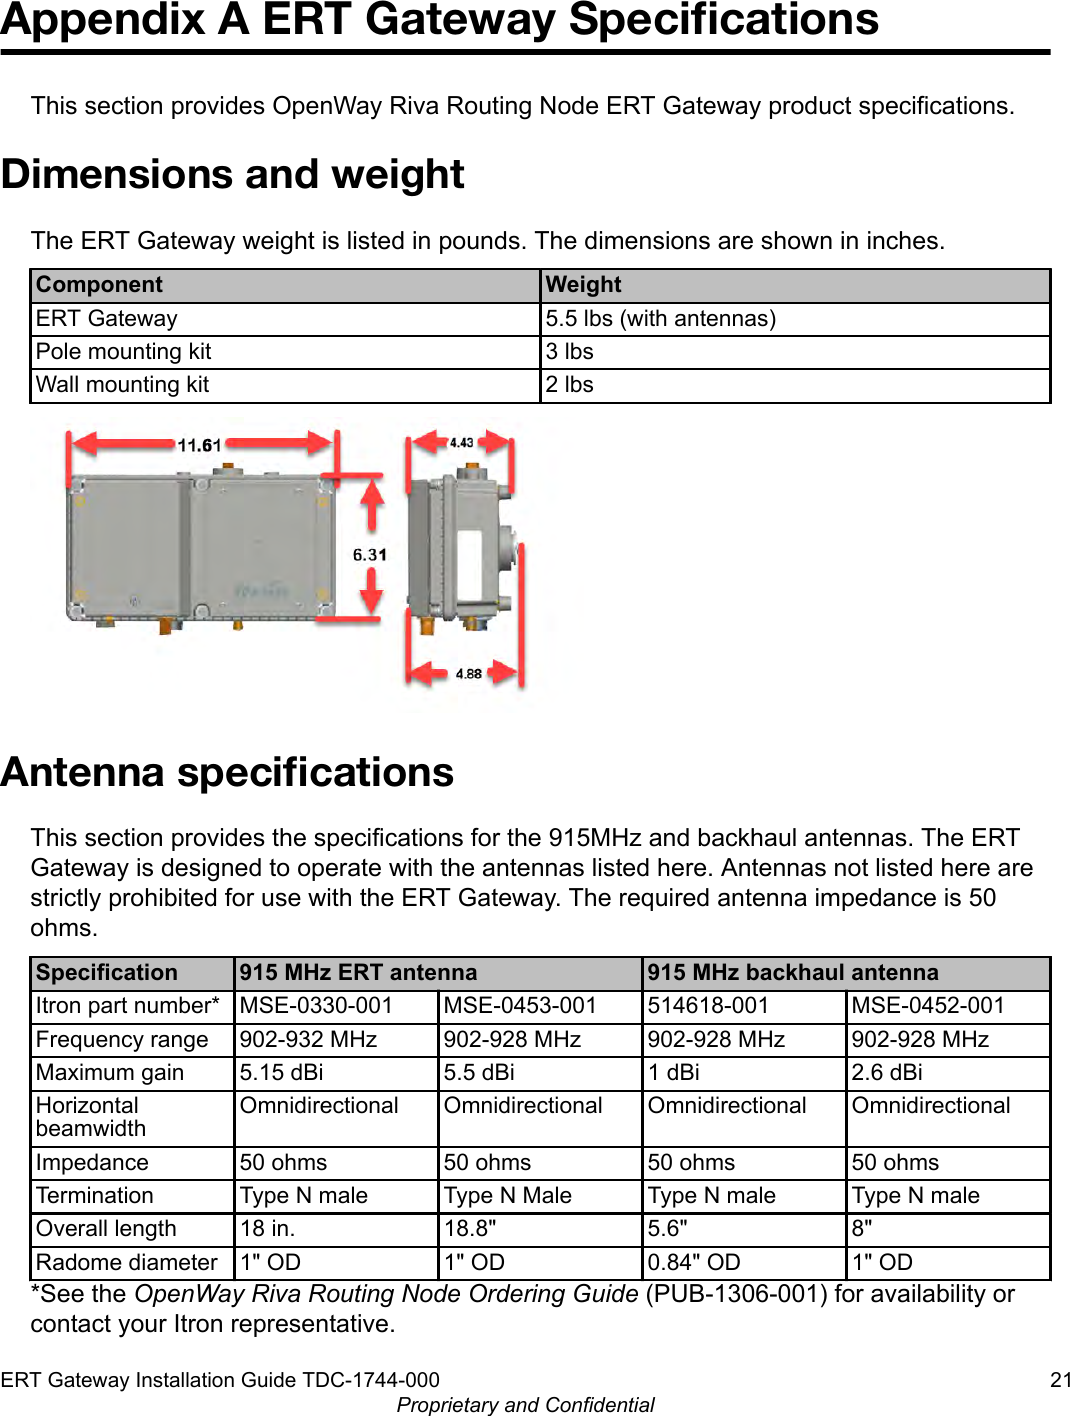 Appendix A ERT Gateway SpeciﬁcationsThis section provides OpenWay Riva Routing Node ERT Gateway product specifications.Dimensions and weightThe ERT Gateway weight is listed in pounds. The dimensions are shown in inches.Component WeightERT Gateway 5.5 lbs (with antennas)Pole mounting kit 3 lbsWall mounting kit 2 lbsAntenna speciﬁcationsThis section provides the specifications for the 915MHz and backhaul antennas. The ERTGateway is designed to operate with the antennas listed here. Antennas not listed here arestrictly prohibited for use with the ERT Gateway. The required antenna impedance is 50ohms.Specification 915 MHz ERT antenna 915 MHz backhaul antennaItron part number* MSE-0330-001 MSE-0453-001 514618-001 MSE-0452-001Frequency range 902-932 MHz 902-928 MHz 902-928 MHz 902-928 MHzMaximum gain 5.15 dBi 5.5 dBi 1 dBi 2.6 dBiHorizontalbeamwidthOmnidirectional Omnidirectional Omnidirectional OmnidirectionalImpedance 50 ohms 50 ohms 50 ohms 50 ohmsTermination Type N male Type N Male Type N male Type N maleOverall length 18 in. 18.8&quot; 5.6&quot; 8&quot;Radome diameter 1&quot; OD 1&quot; OD 0.84&quot; OD 1&quot; OD*See the OpenWay Riva Routing Node Ordering Guide (PUB-1306-001) for availability orcontact your Itron representative.ERT Gateway Installation Guide TDC-1744-000 21Proprietary and Confidential